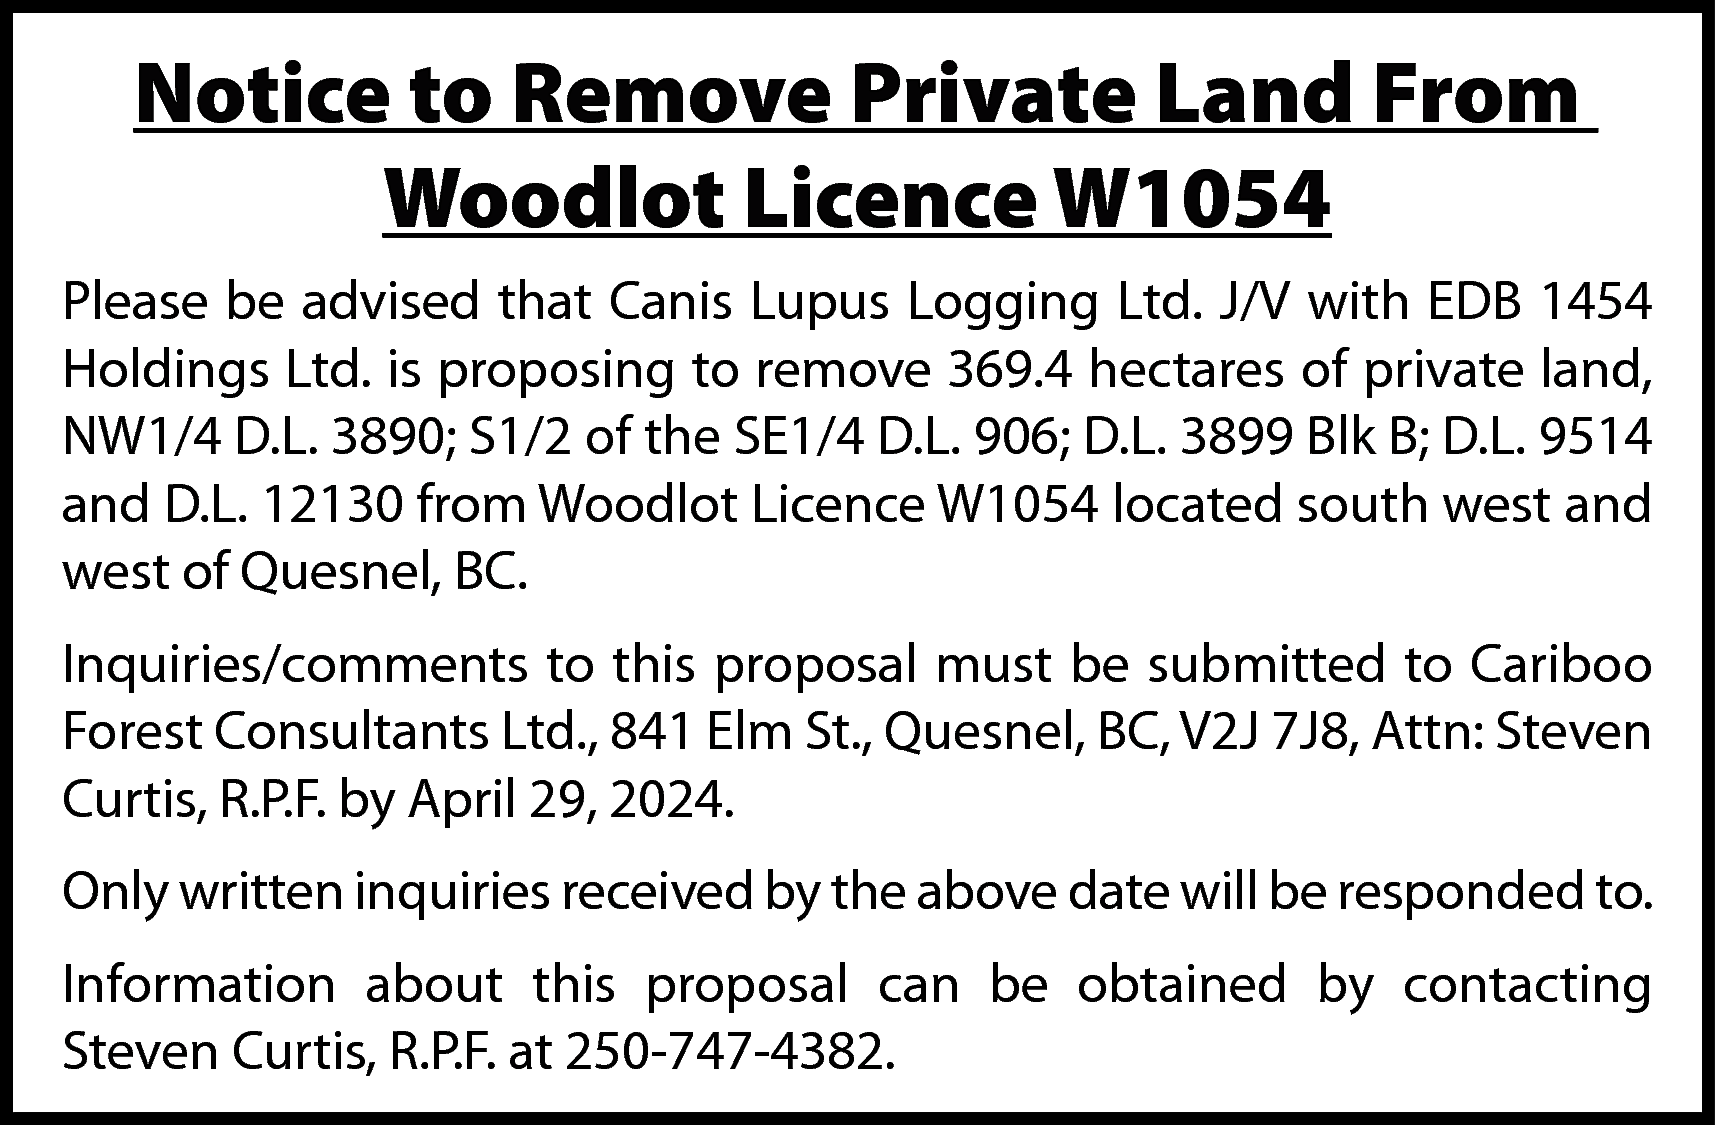 Notice to Remove Private Land  Notice to Remove Private Land From  Woodlot Licence W1054  Please be advised that Canis Lupus Logging Ltd. J/V with EDB 1454  Holdings Ltd. is proposing to remove 369.4 hectares of private land,  NW1/4 D.L. 3890; S1/2 of the SE1/4 D.L. 906; D.L. 3899 Blk B; D.L. 9514  and D.L. 12130 from Woodlot Licence W1054 located south west and  west of Quesnel, BC.  Inquiries/comments to this proposal must be submitted to Cariboo  Forest Consultants Ltd., 841 Elm St., Quesnel, BC, V2J 7J8, Attn: Steven  Curtis, R.P.F. by April 29, 2024.  Only written inquiries received by the above date will be responded to.  Information about this proposal can be obtained by contacting  Steven Curtis, R.P.F. at 250-747-4382.    